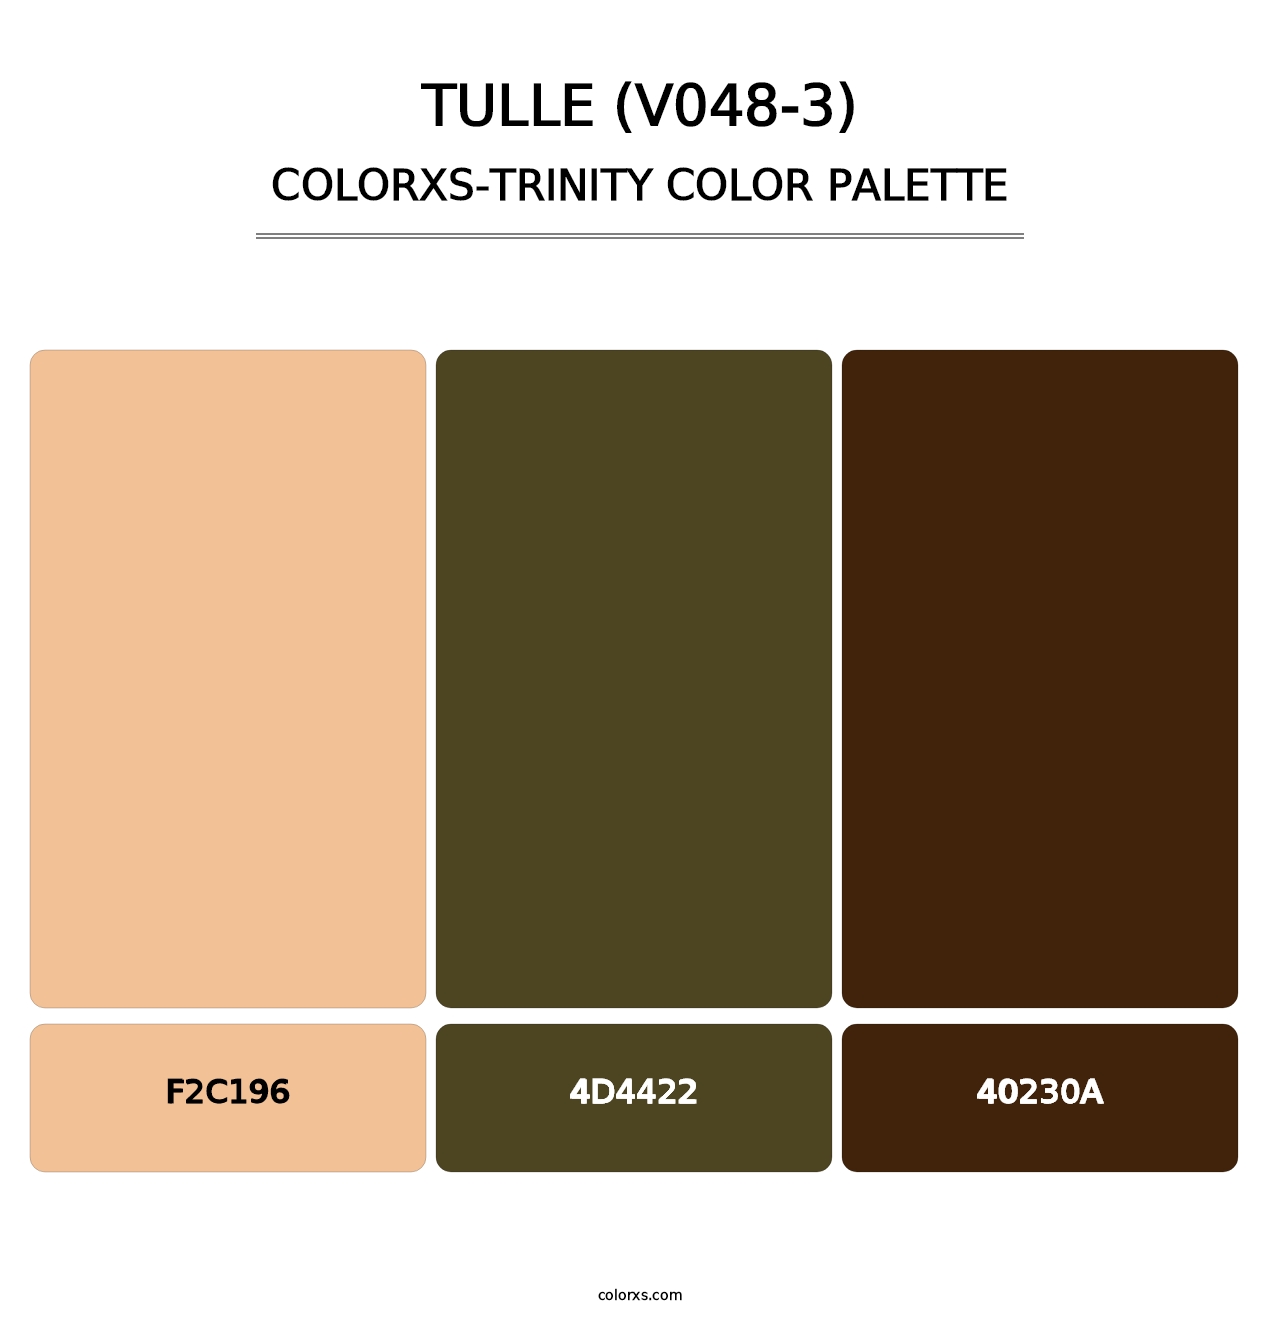 Tulle (V048-3) - Colorxs Trinity Palette